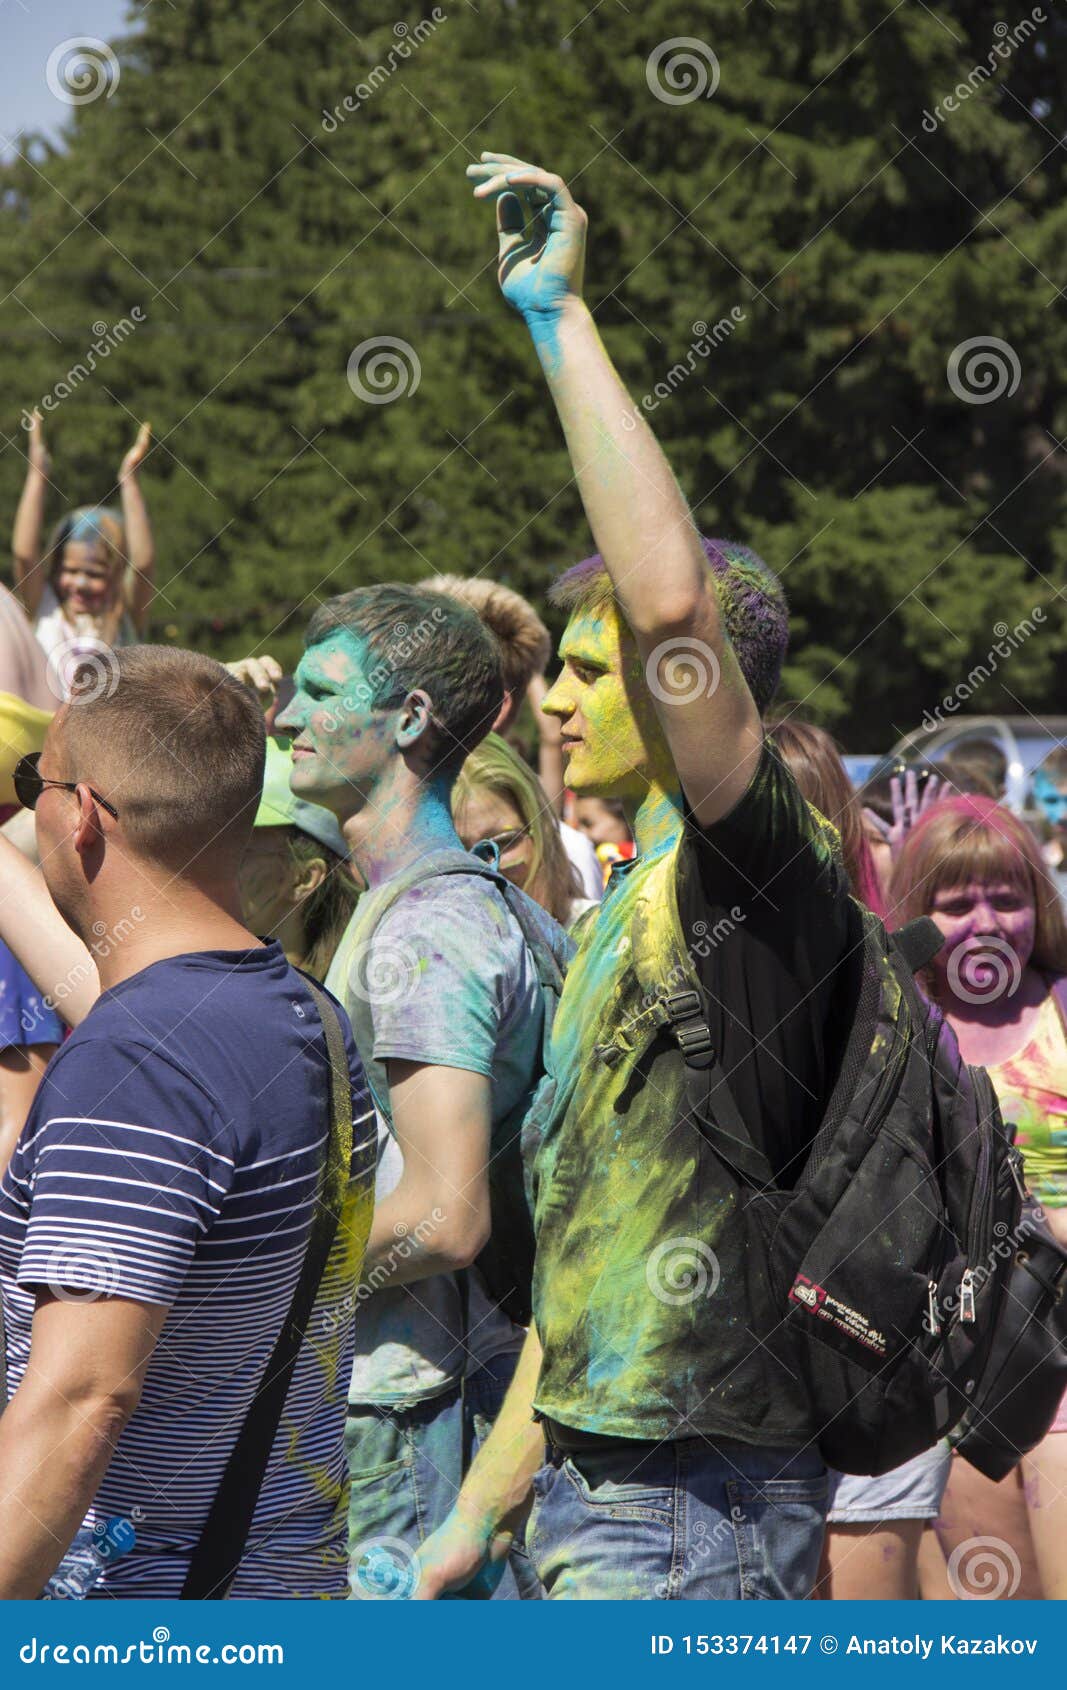 Russia, Krasnoyarsk, June 2019: Young People Play with Colors. the